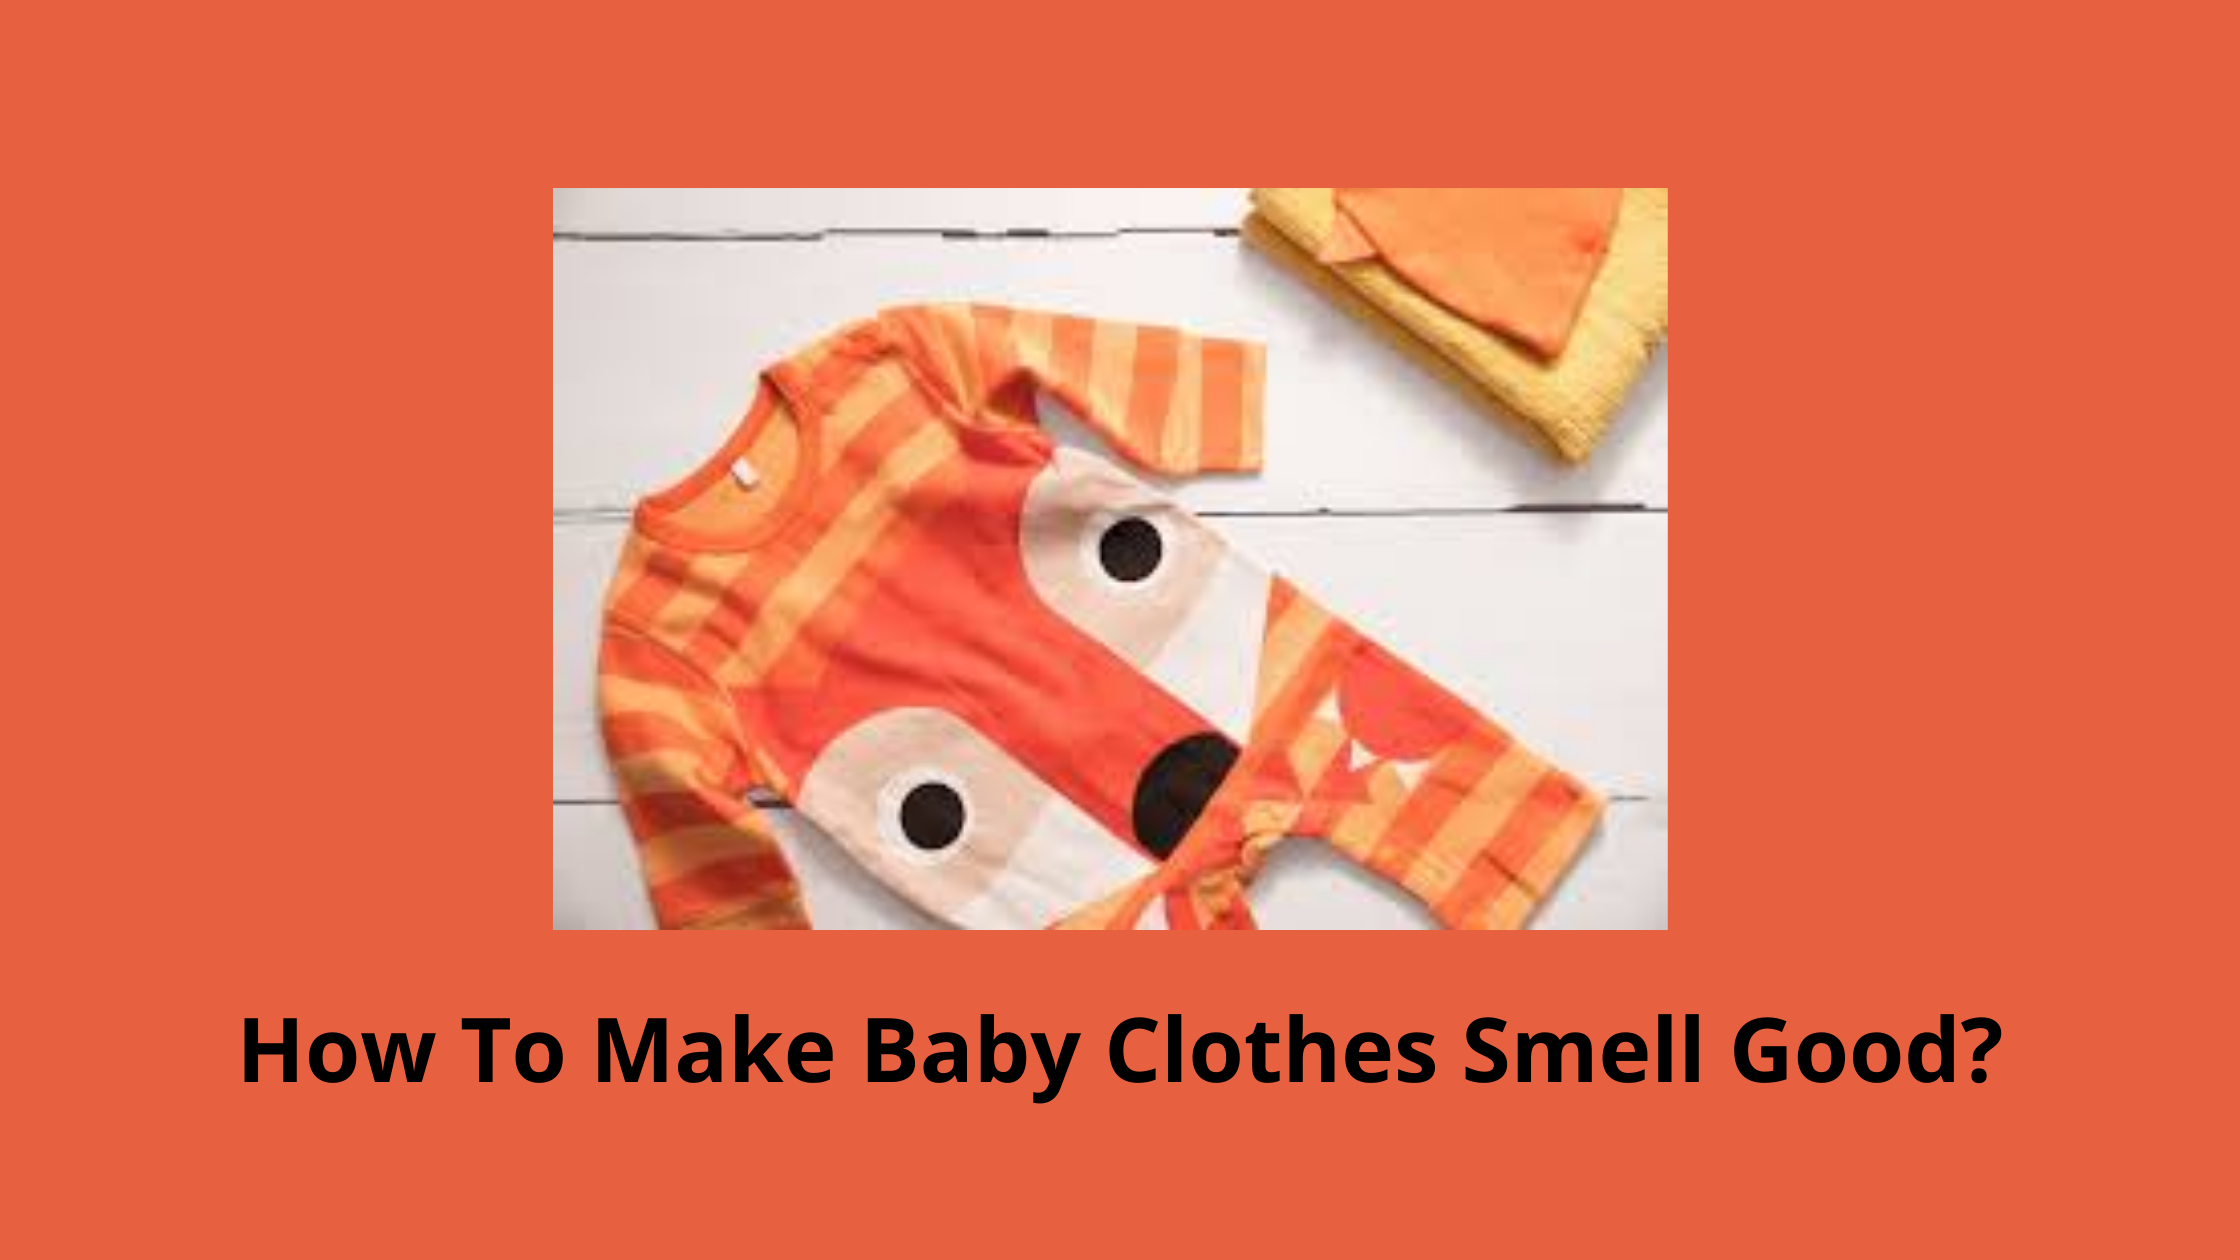 How To Make Baby Clothes Smell Good?